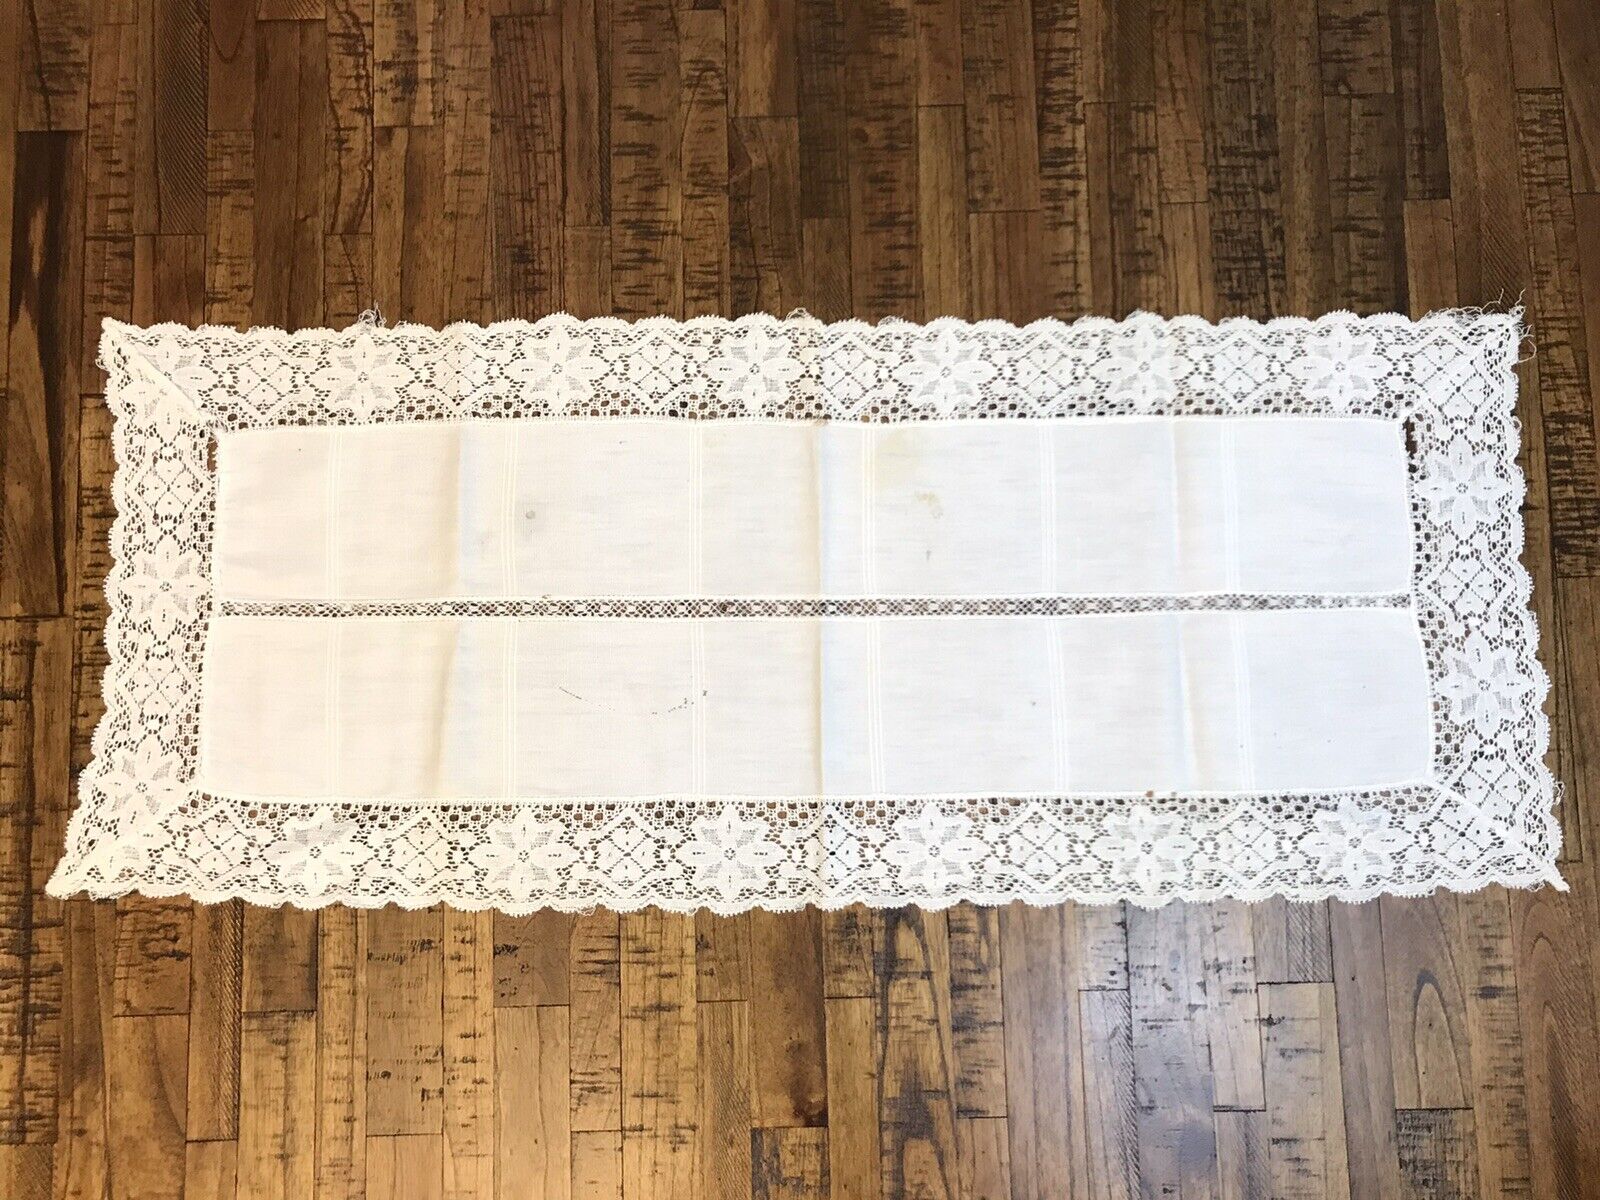 White 14”x34” Lace Trimmed Vintage Cutout embroidered Table runner Cotton blend?